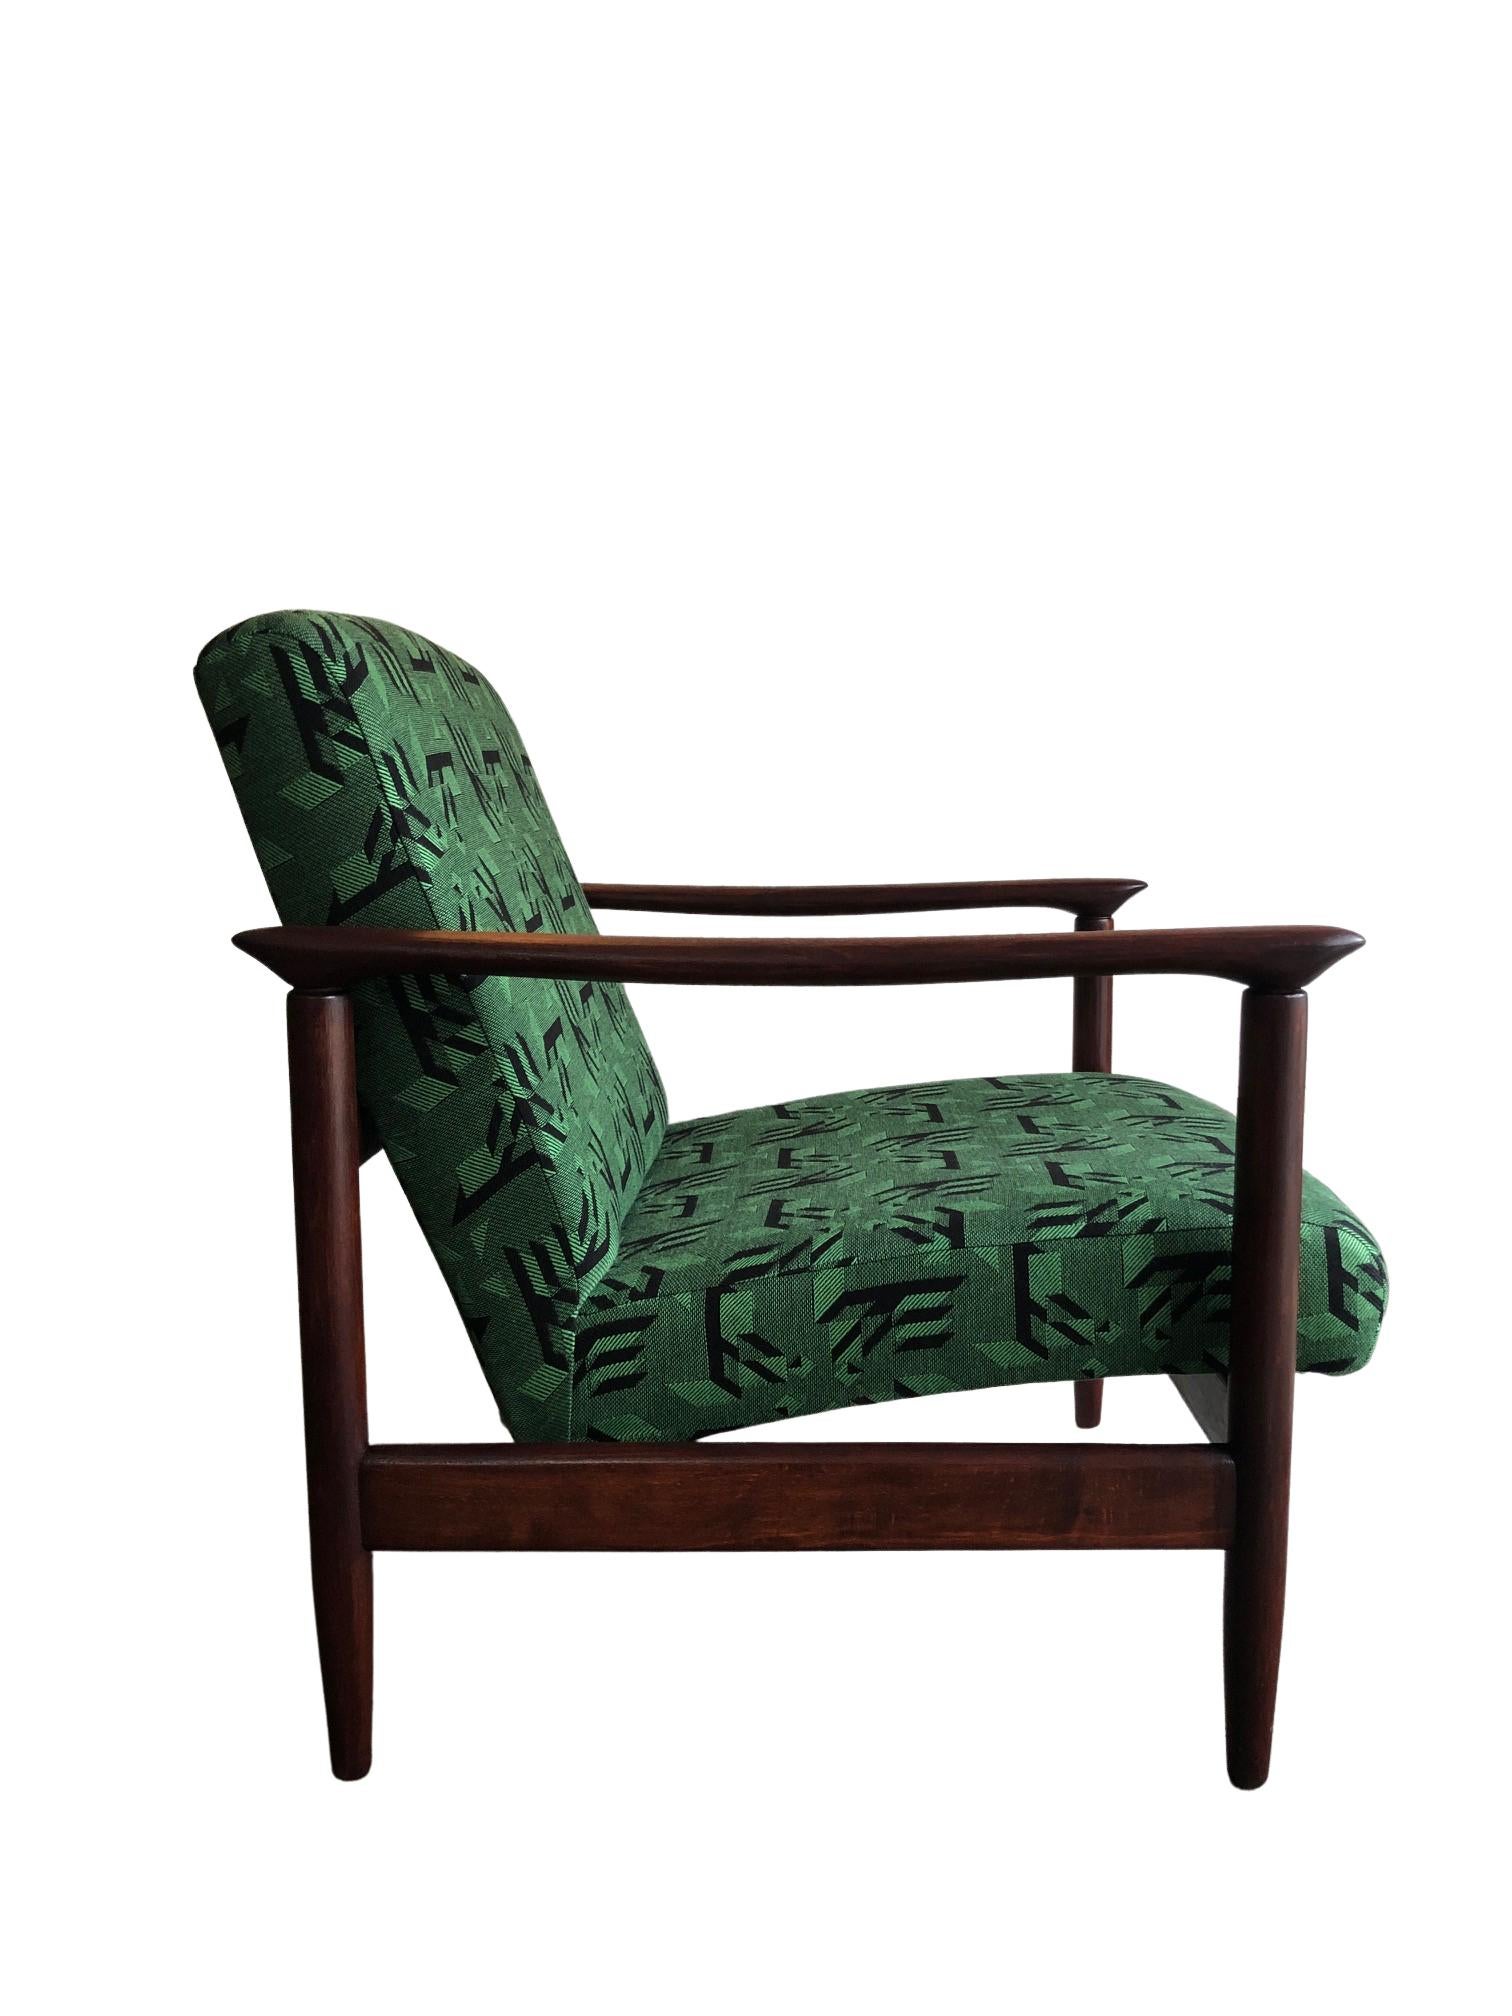 Hand-Crafted Mid Century Armchairs in Green Jacquard, by Edmund Homa, 1960s, Set of Two For Sale